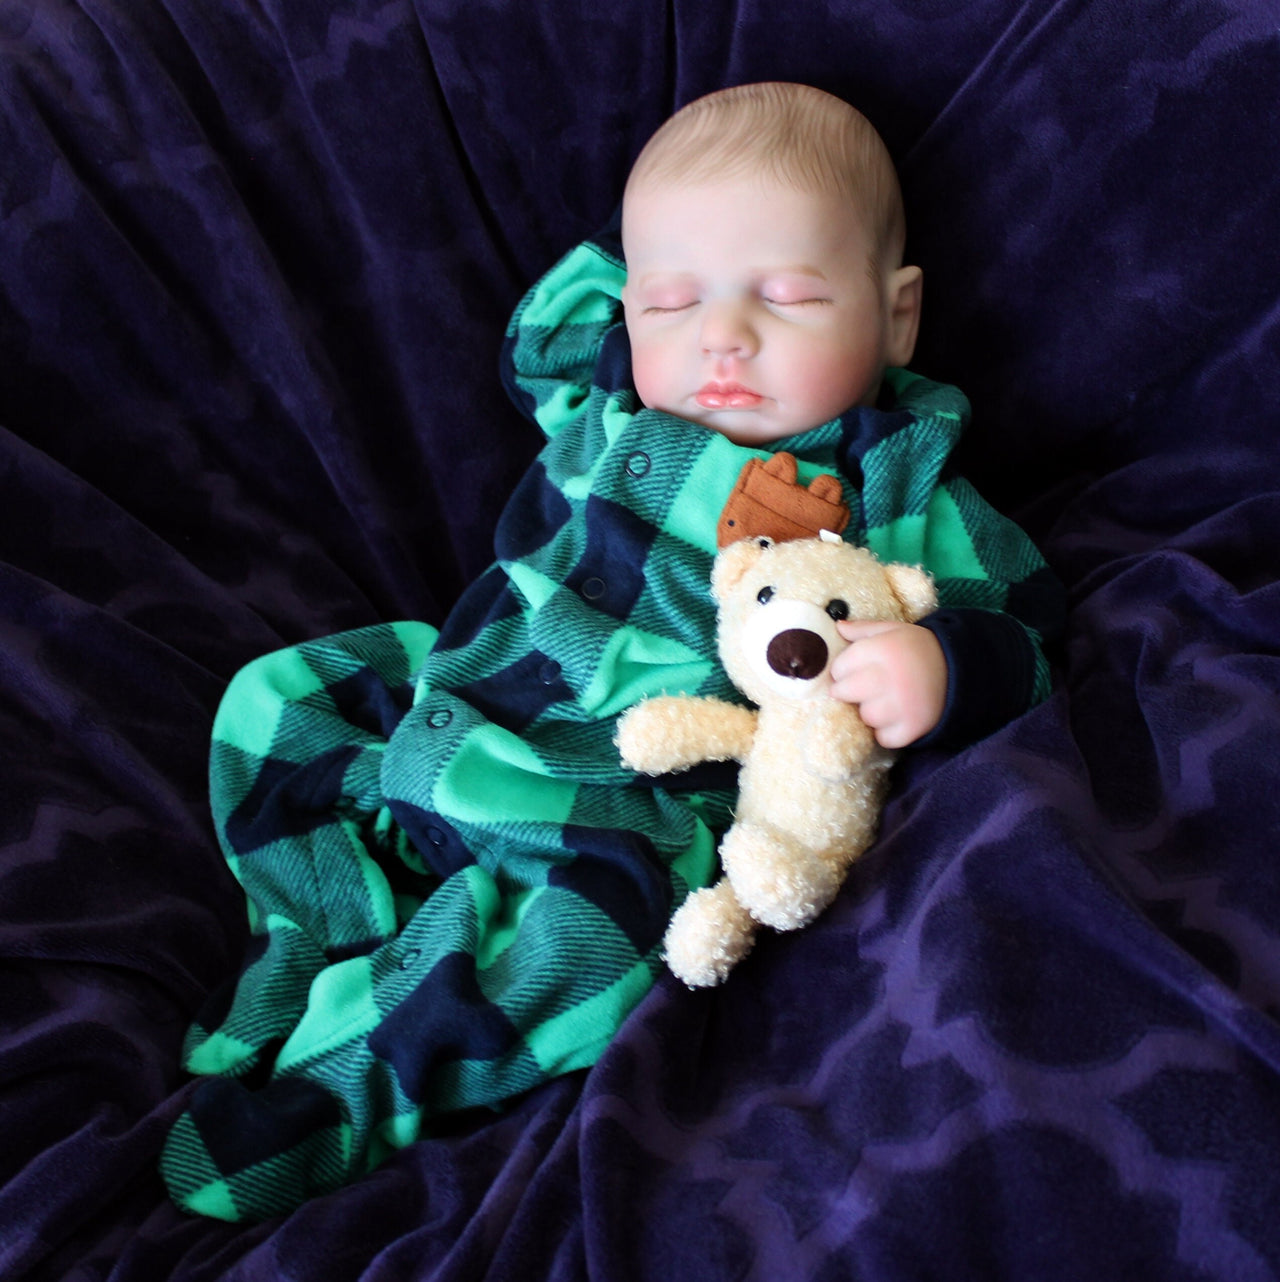 20" Reborn Therapy Baby Doll - Lifelike Weighted Newborn Plaid Christmas Outfit, Child-Friendly, Ideal for Realistic Play, Unique Xmas Gift